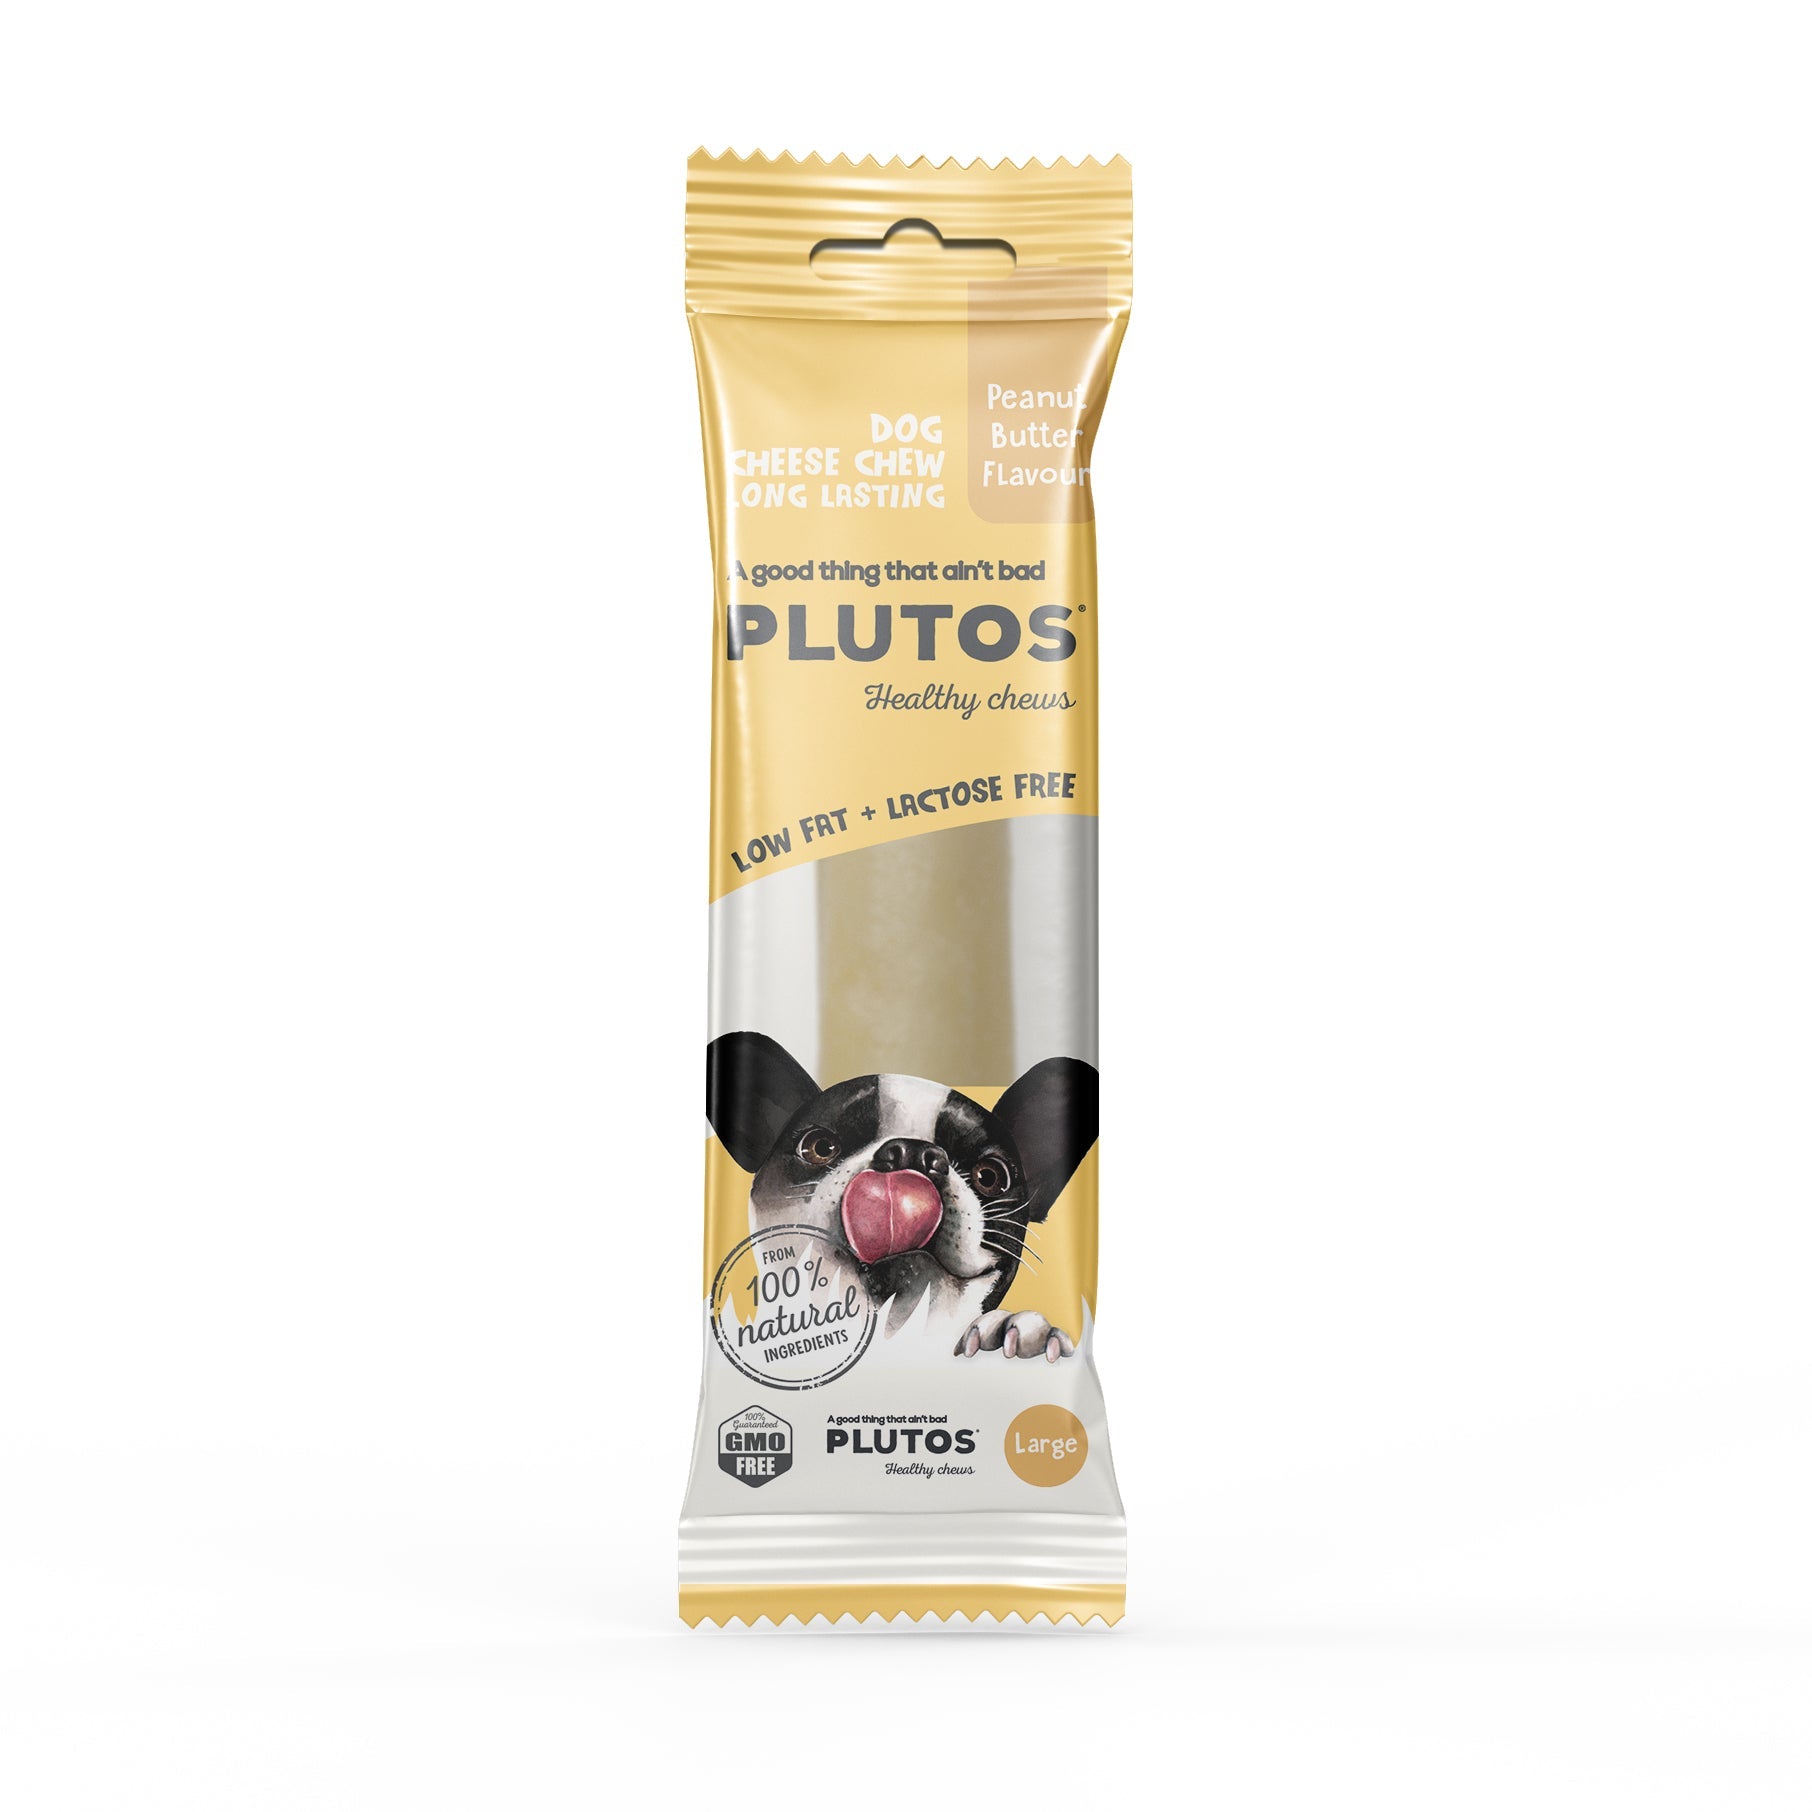 Plutos Healthy Chews Cheese and Peanut Butter - Woonona Petfood & Produce